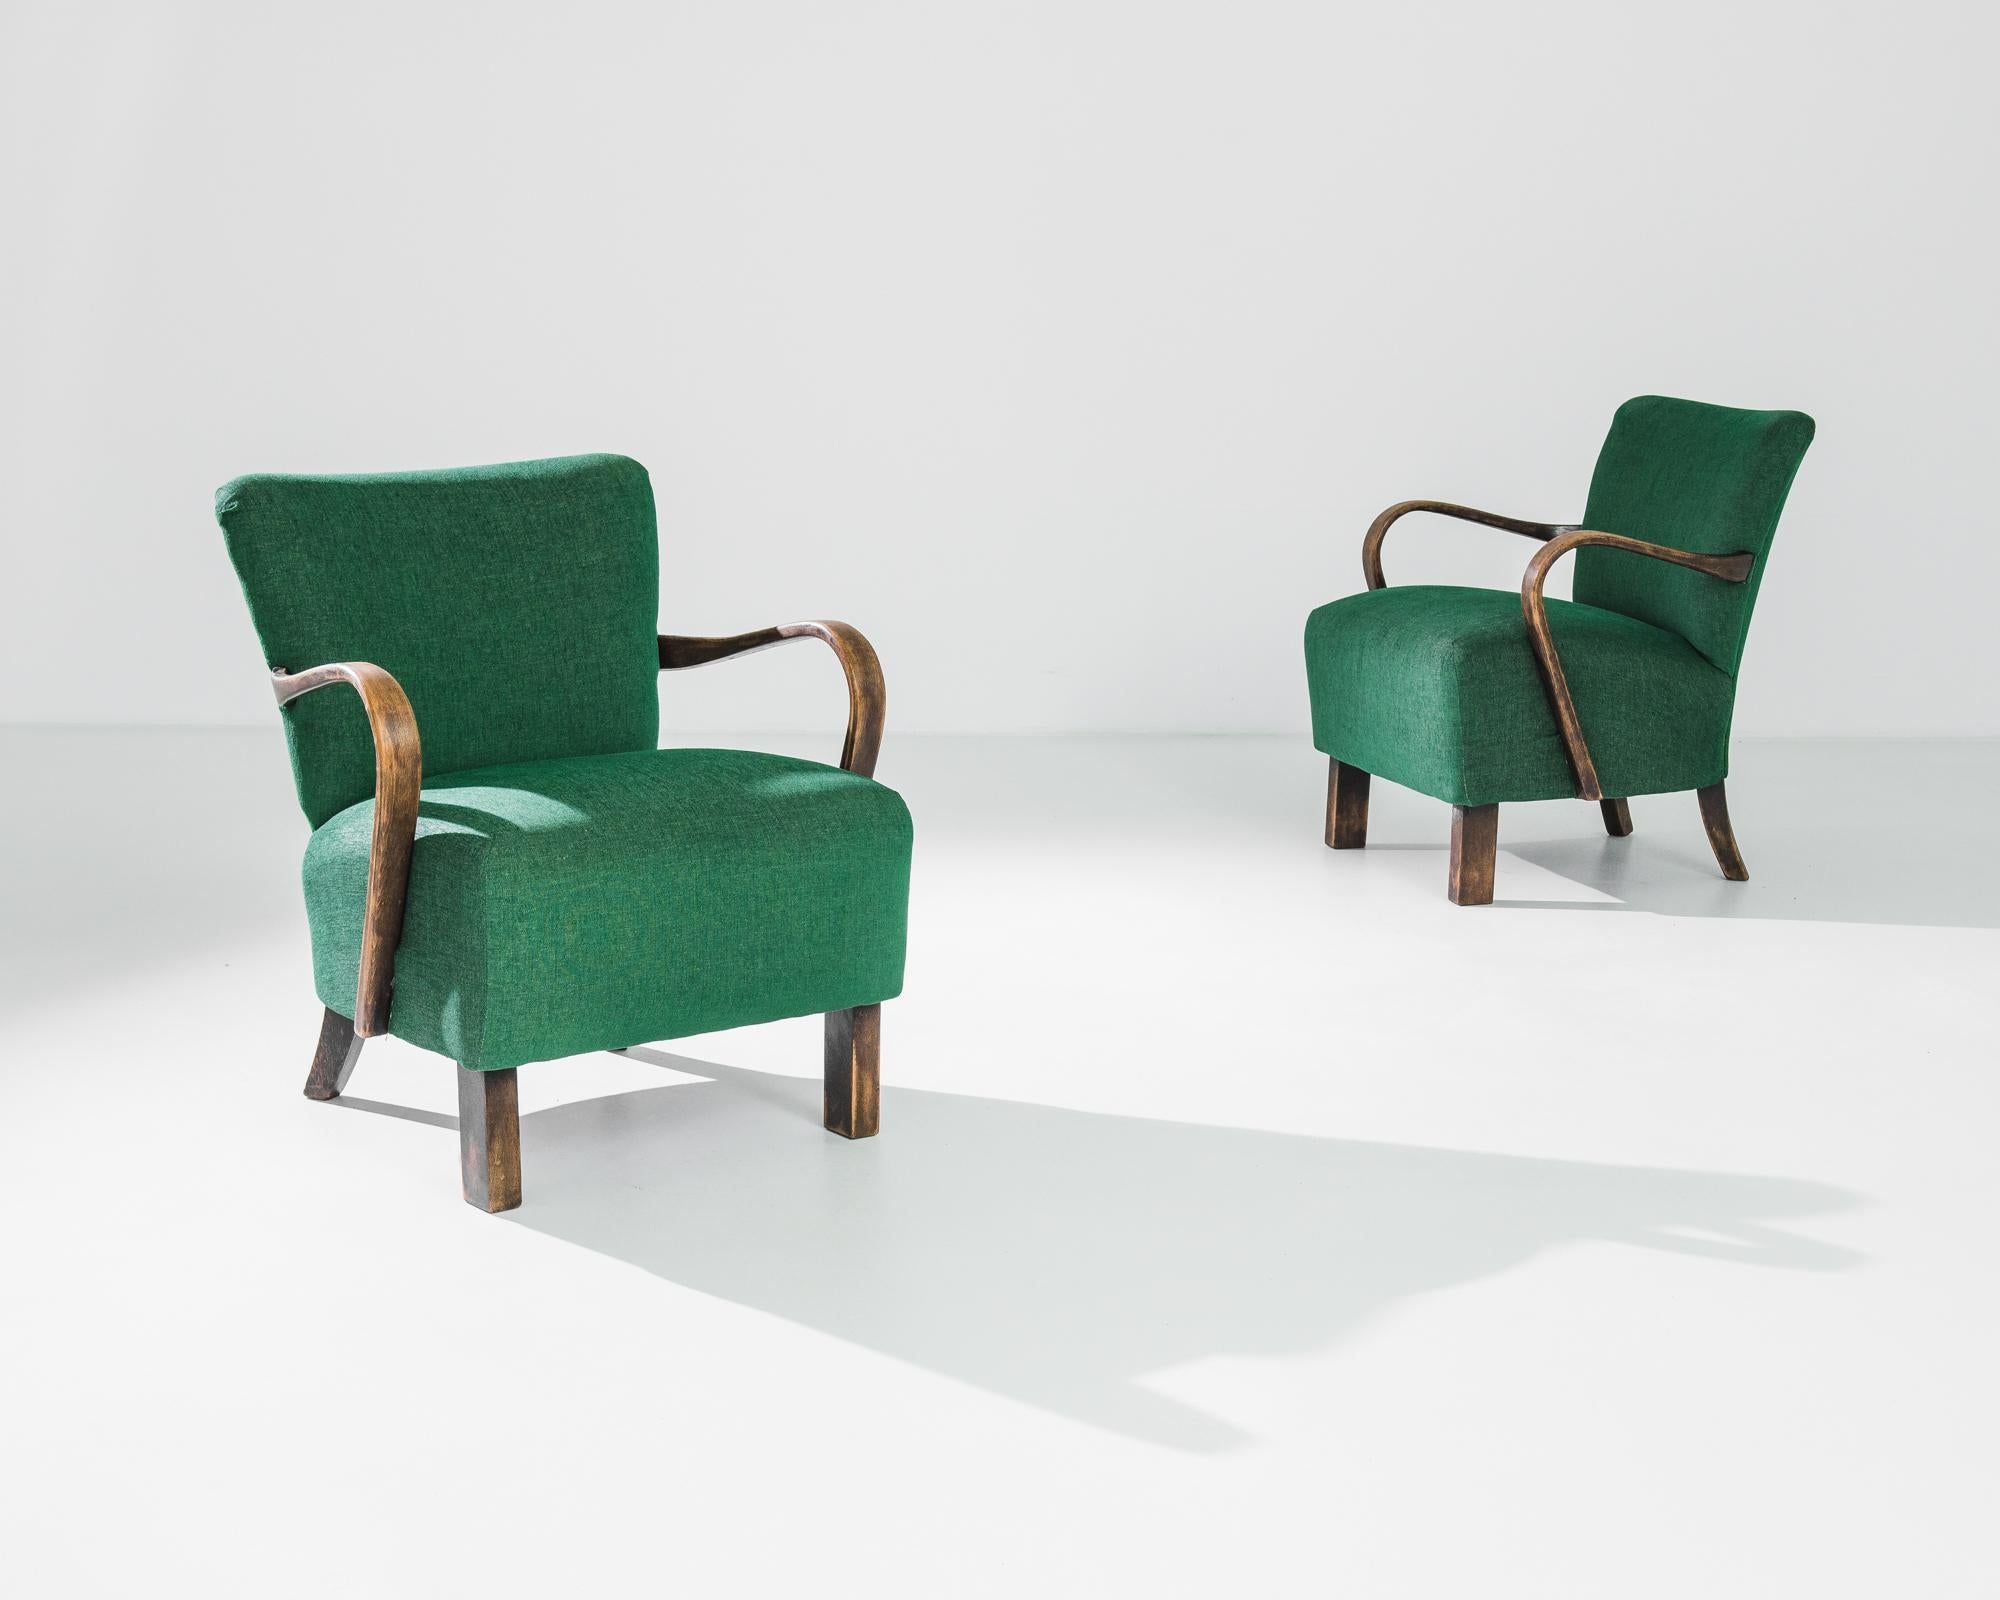 A stylish Mid-Century Modern design and the rich jewel tones of the upholstery gives these pair of 1930s armchairs a unique character. Made by Czech furniture designer J. Halabala, a deep seat upon low legs is framed by fluid bentwood arms and the